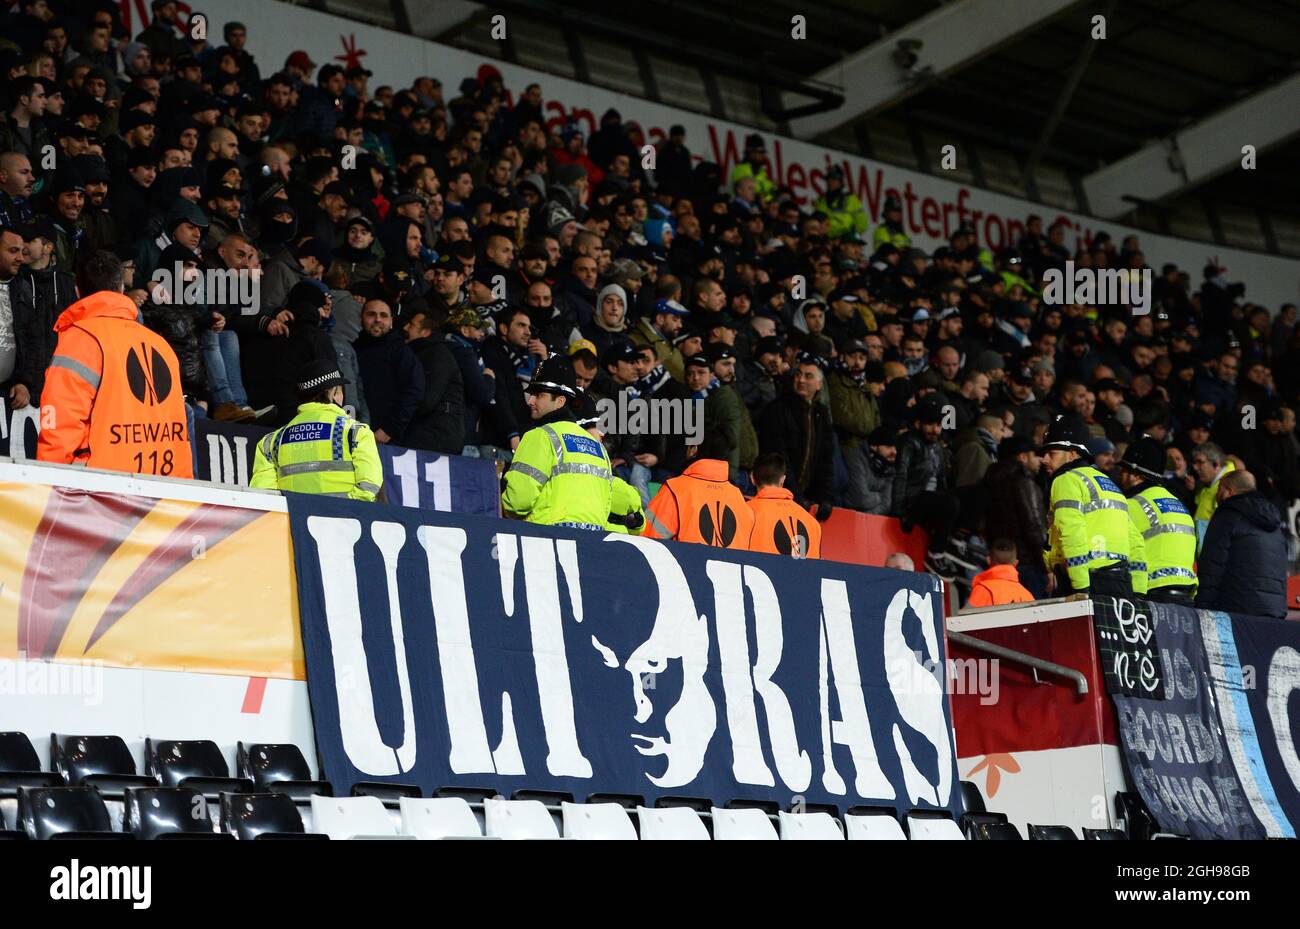 Napoli Ultras display their banner while being watched by police and stewards during the UEFA Europa League, round of 32 match between Swansea City and Napoli held at Liberty Stadium in Swansea, Wales on 20th February 2014. Stock Photo